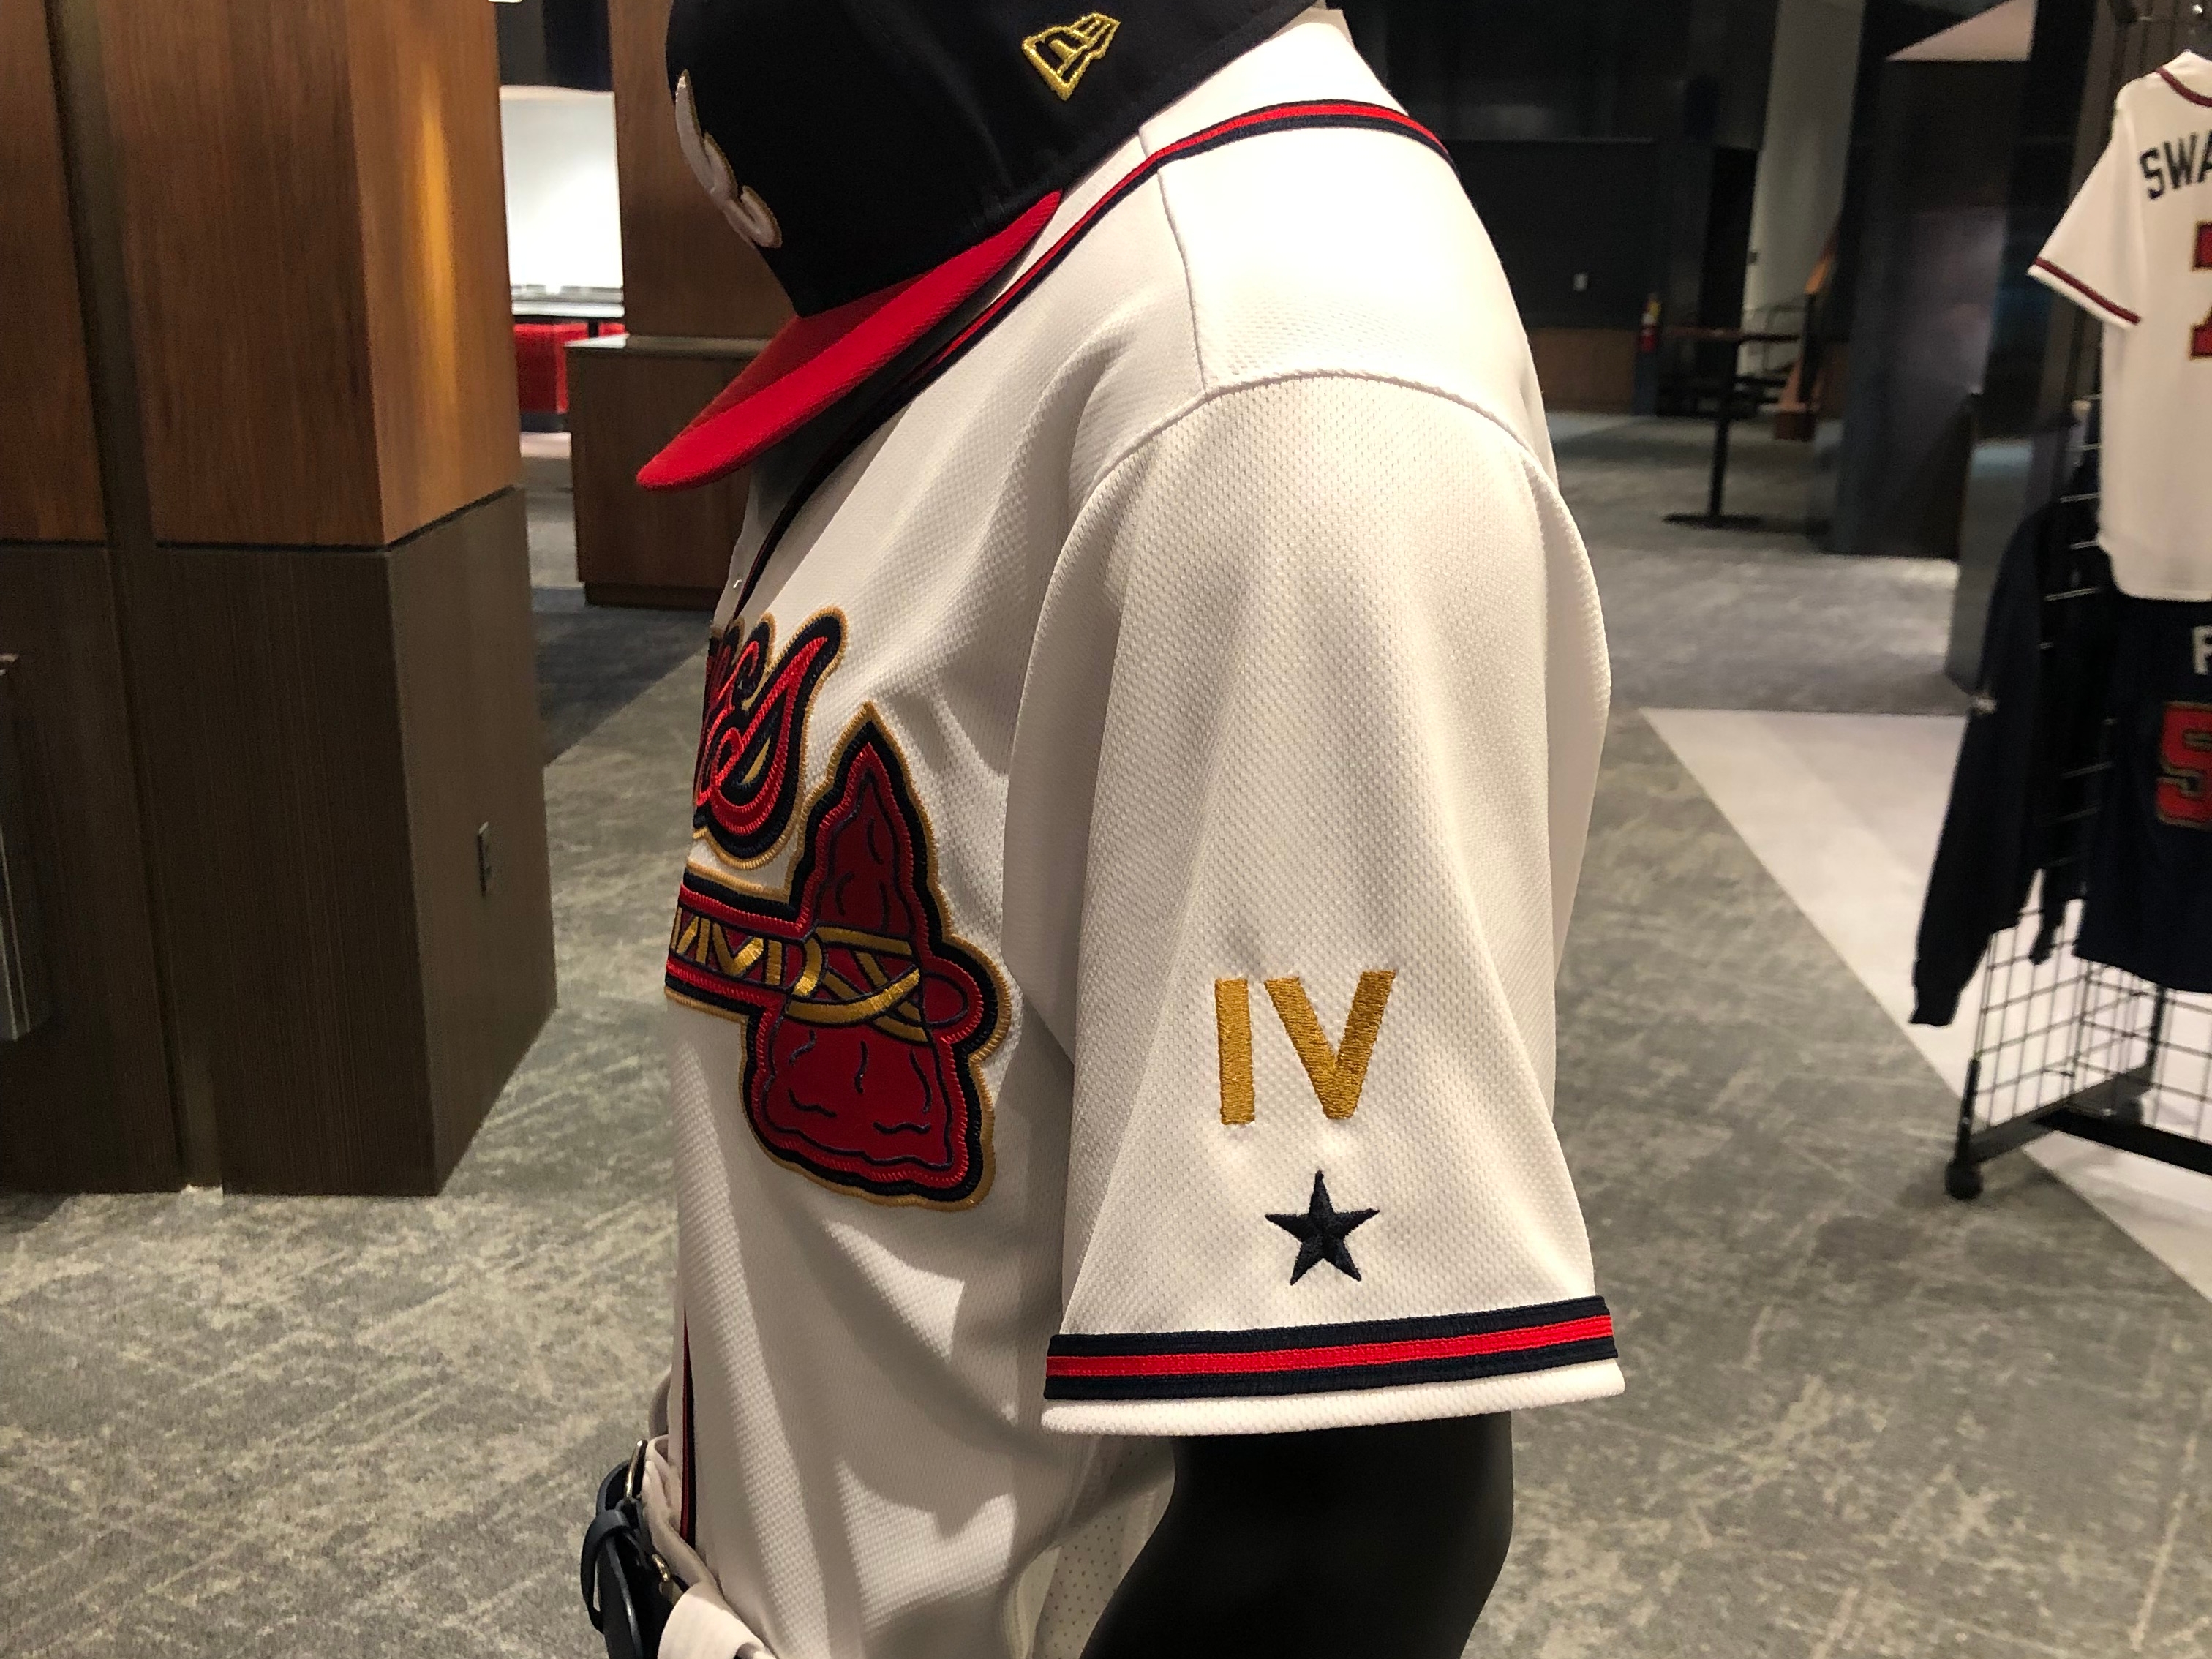 braves jersey with gold